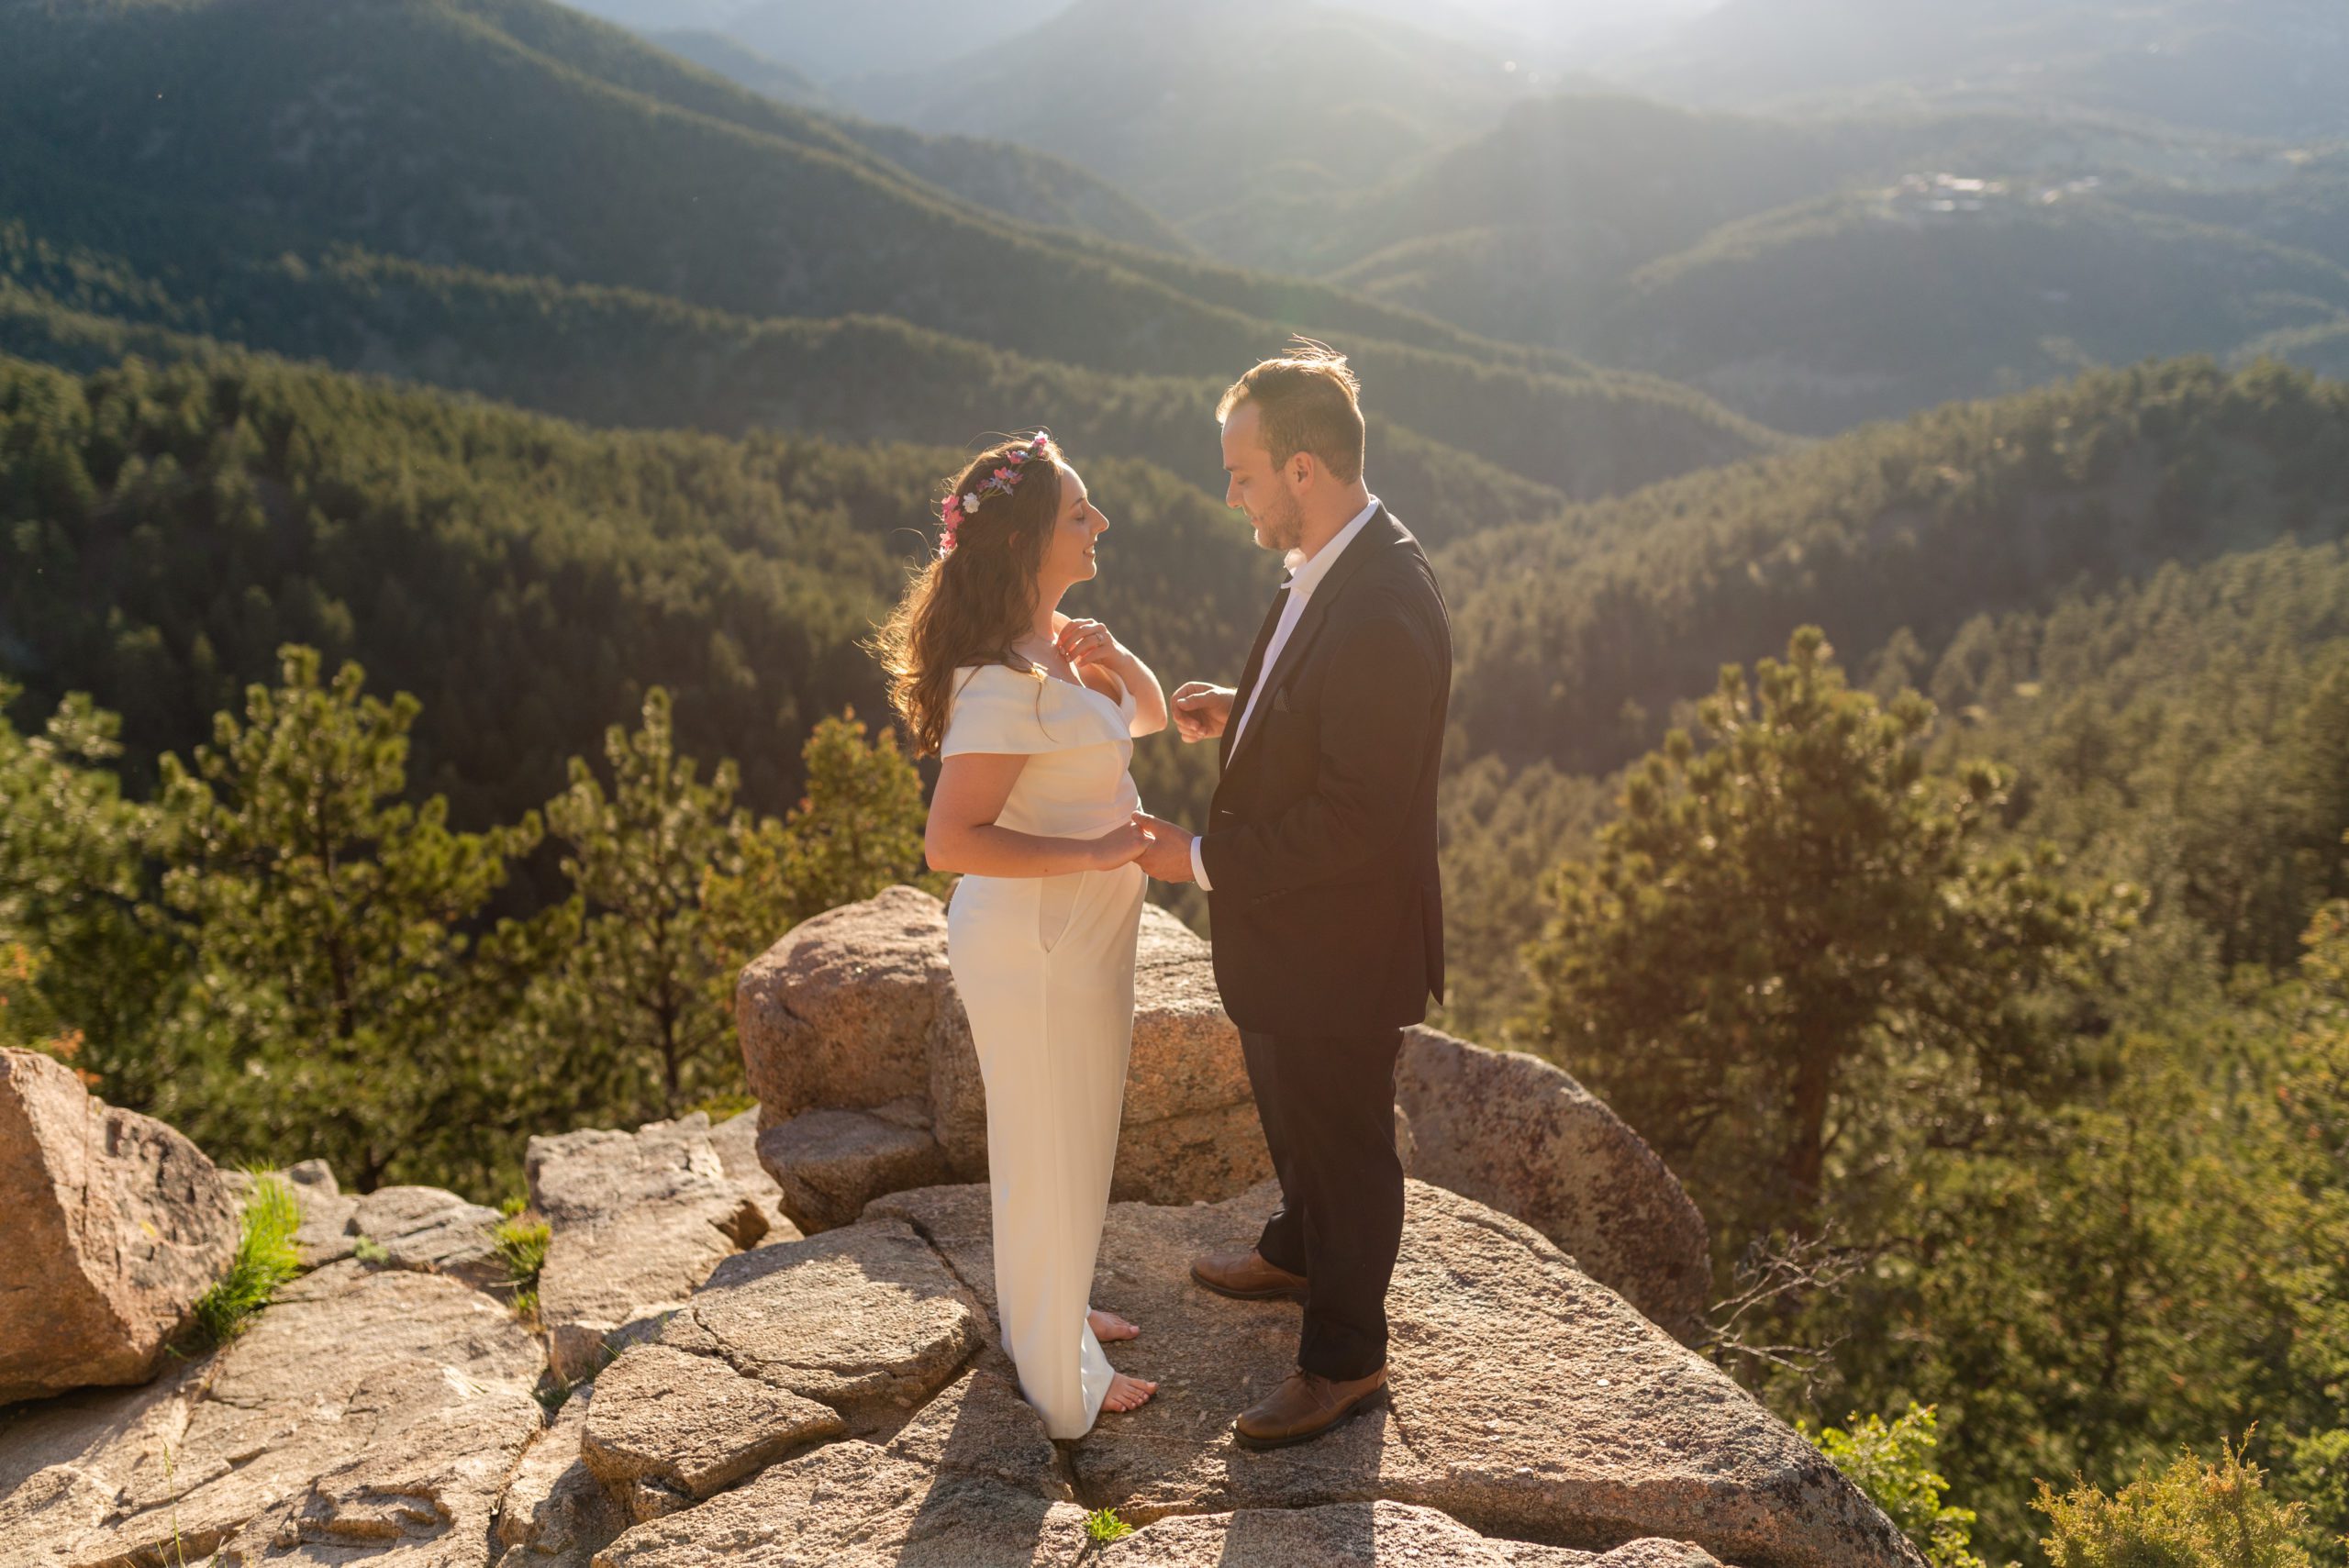 The bride and groom at the top of the overlook during their Boulder hiking elopement near realization point.